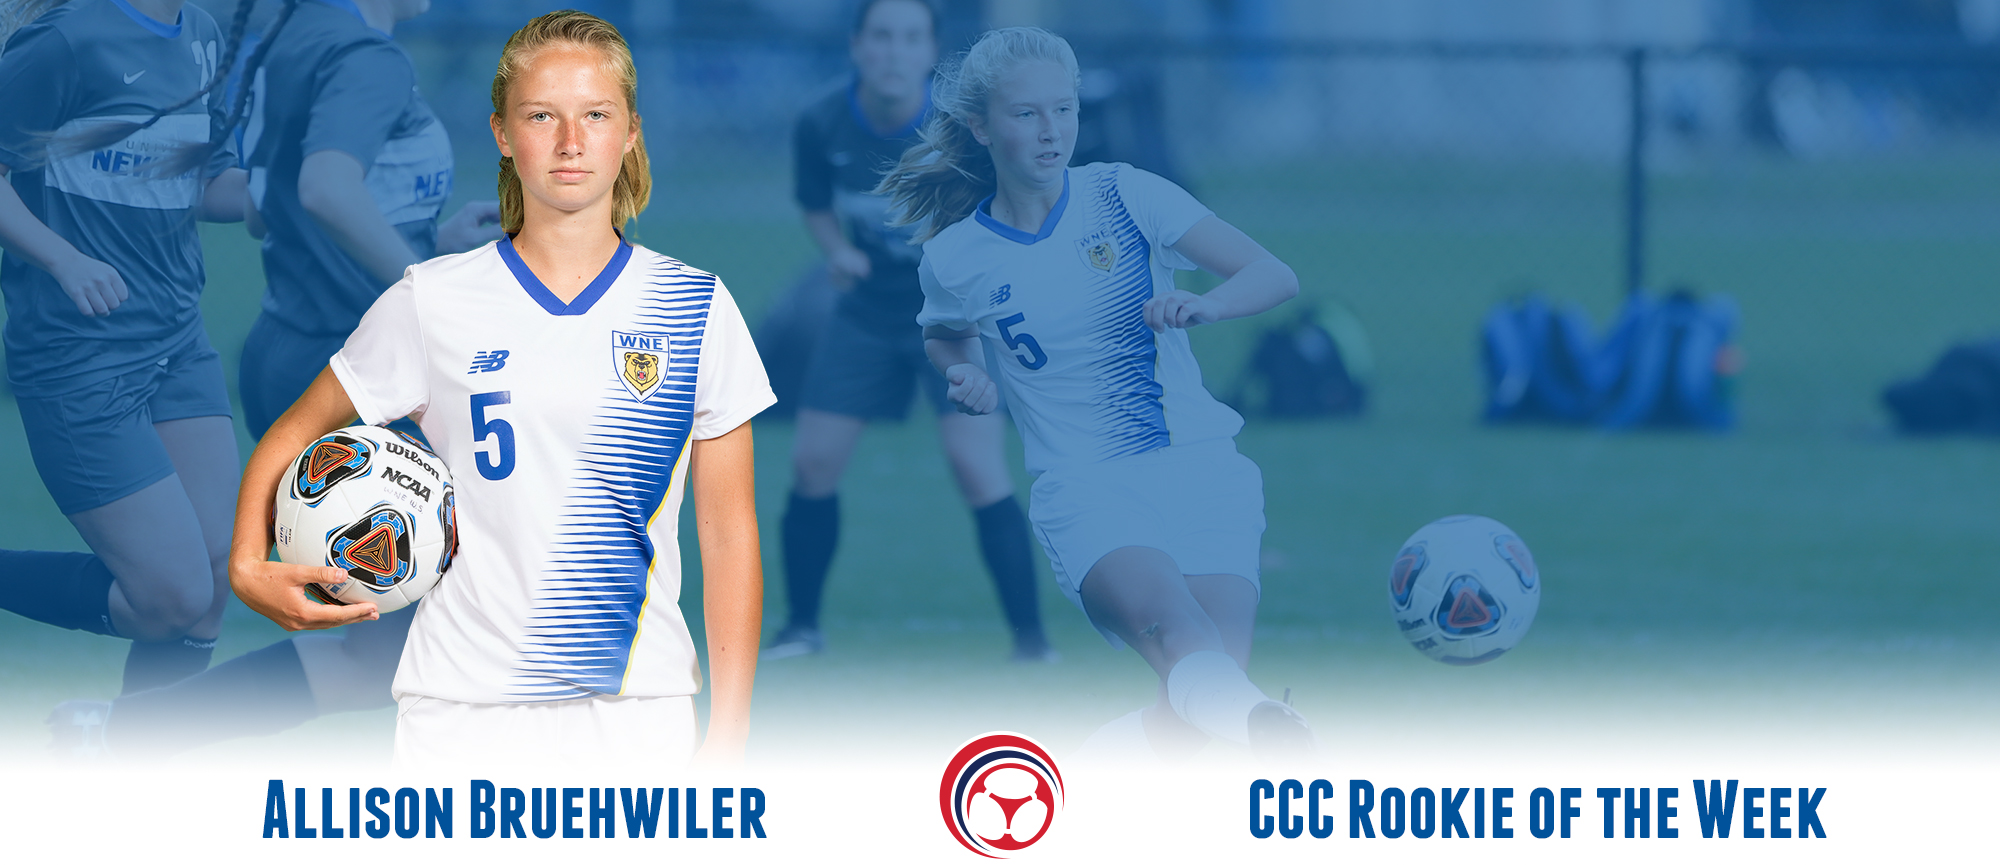 Allison Bruehwiler Receives Second CCC Rookie of the Week Award